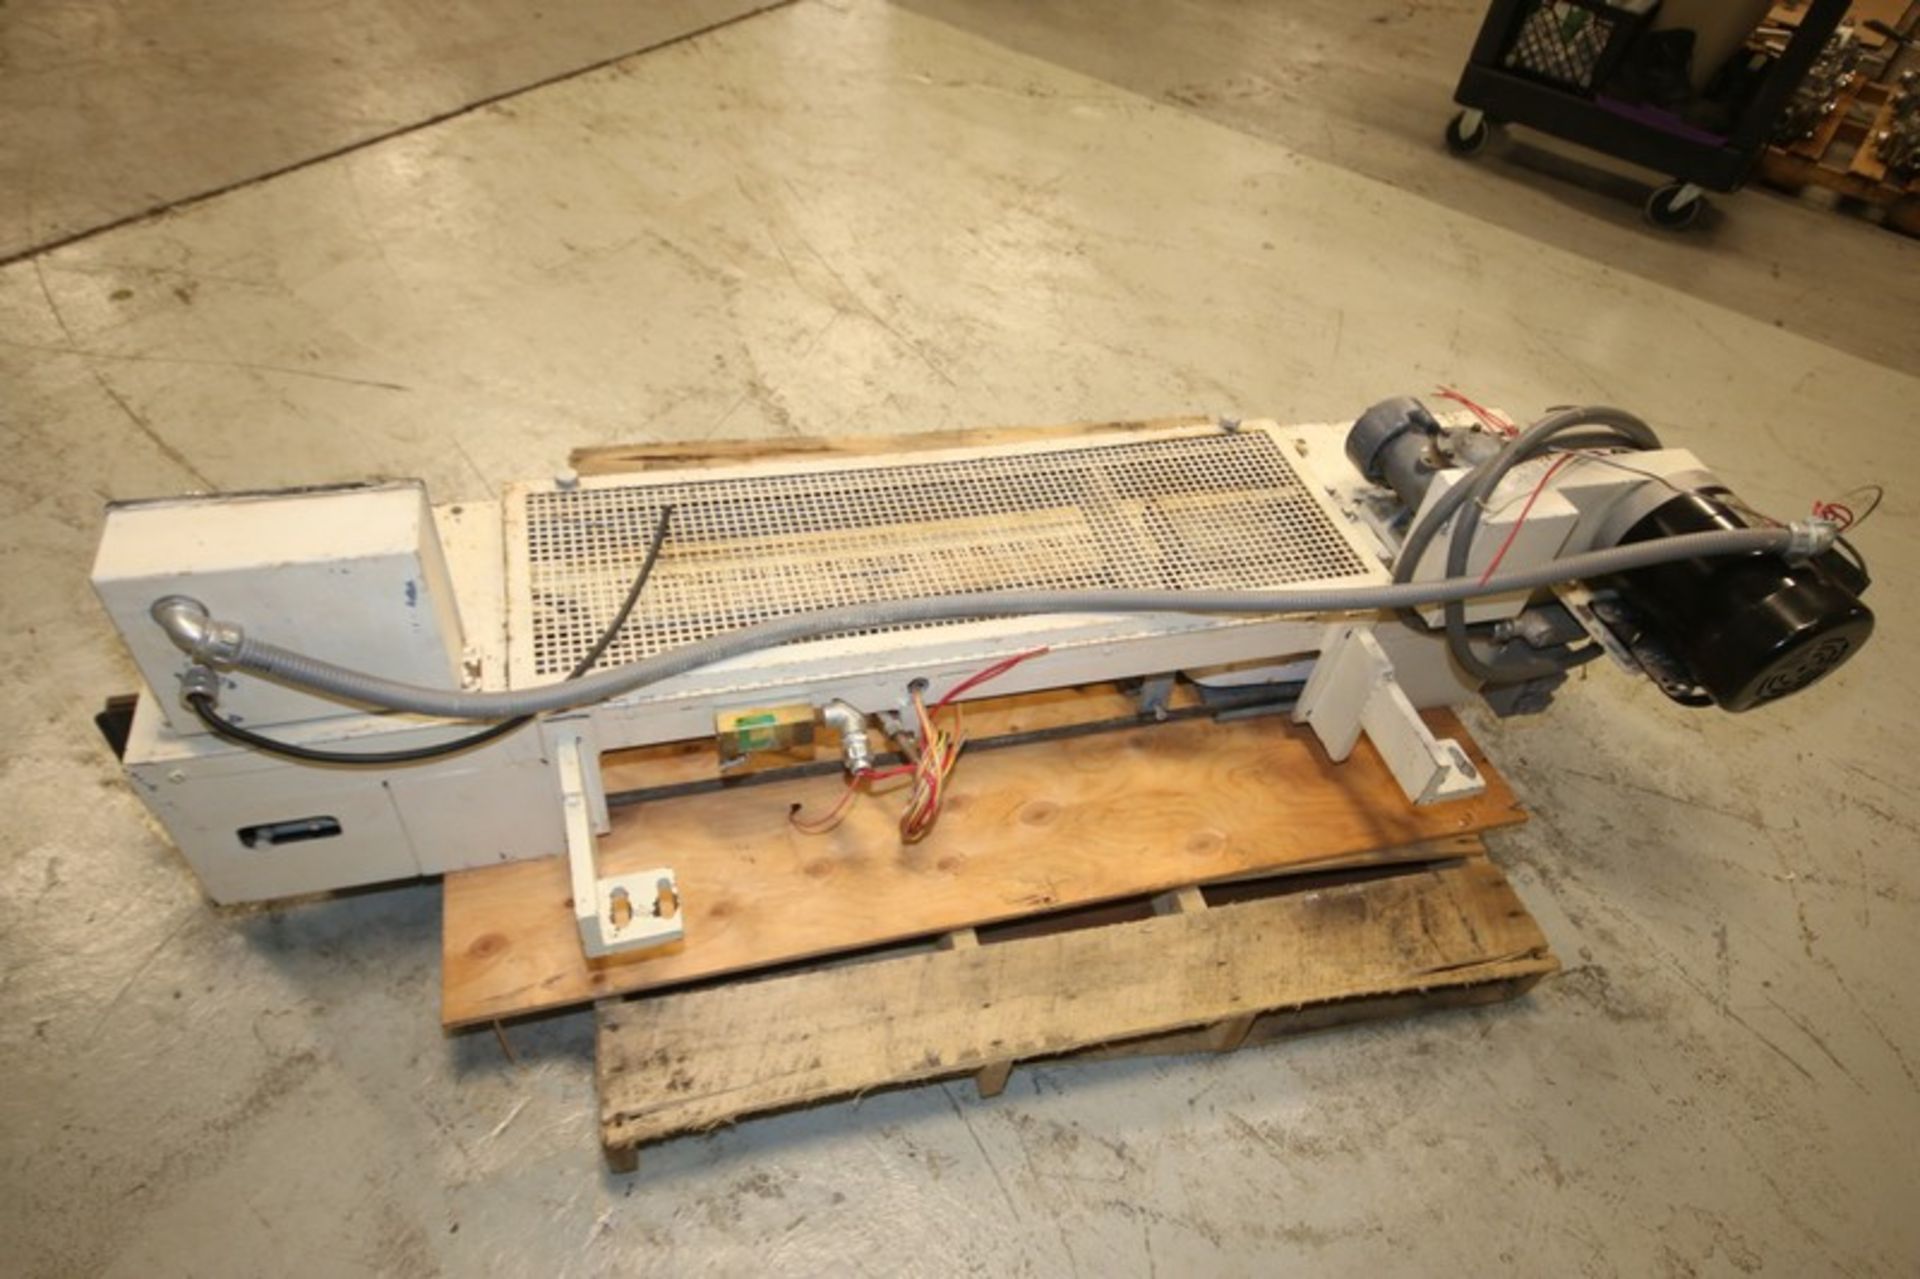 6' L Heat Bag Sealer with 3/4 hp/1725 rpm 208-230/ 460V (INV#84745)(Located @ the MDG Auction - Image 3 of 5